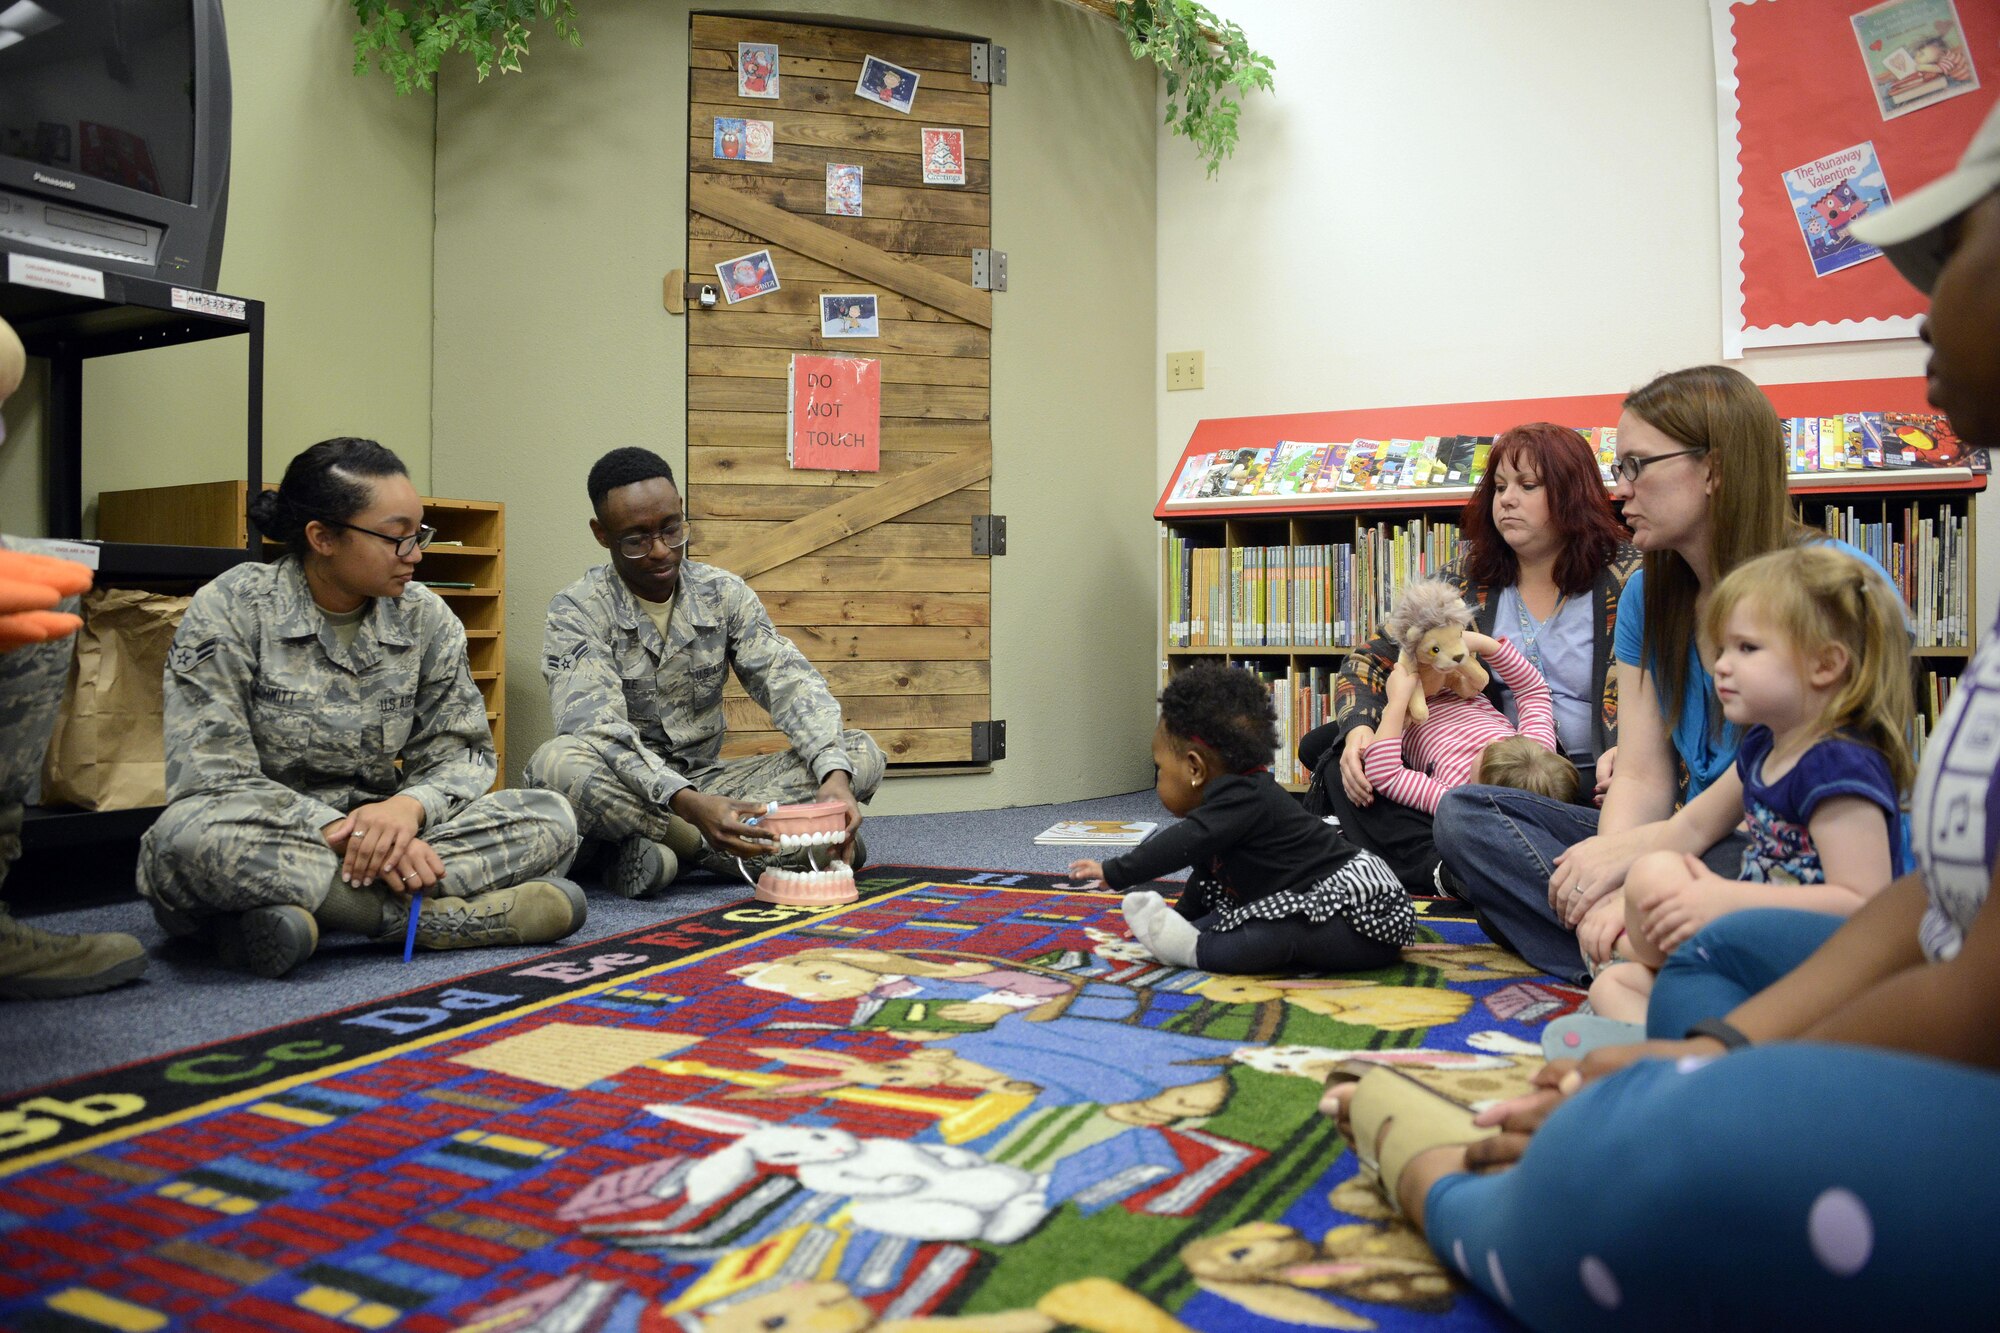 56th Dental Squadron Airmen show children how to properly brush their teeth during their visit to the base library at Luke Air Force Base, Ariz., Feb. 15, 2017.The 56th Dental Squadron is celebrating National Children's Dental Health Month and wants to educate parents on how to care for their children's teeth. (U.S. Air Force photo by Senior Airman Devante Williams)